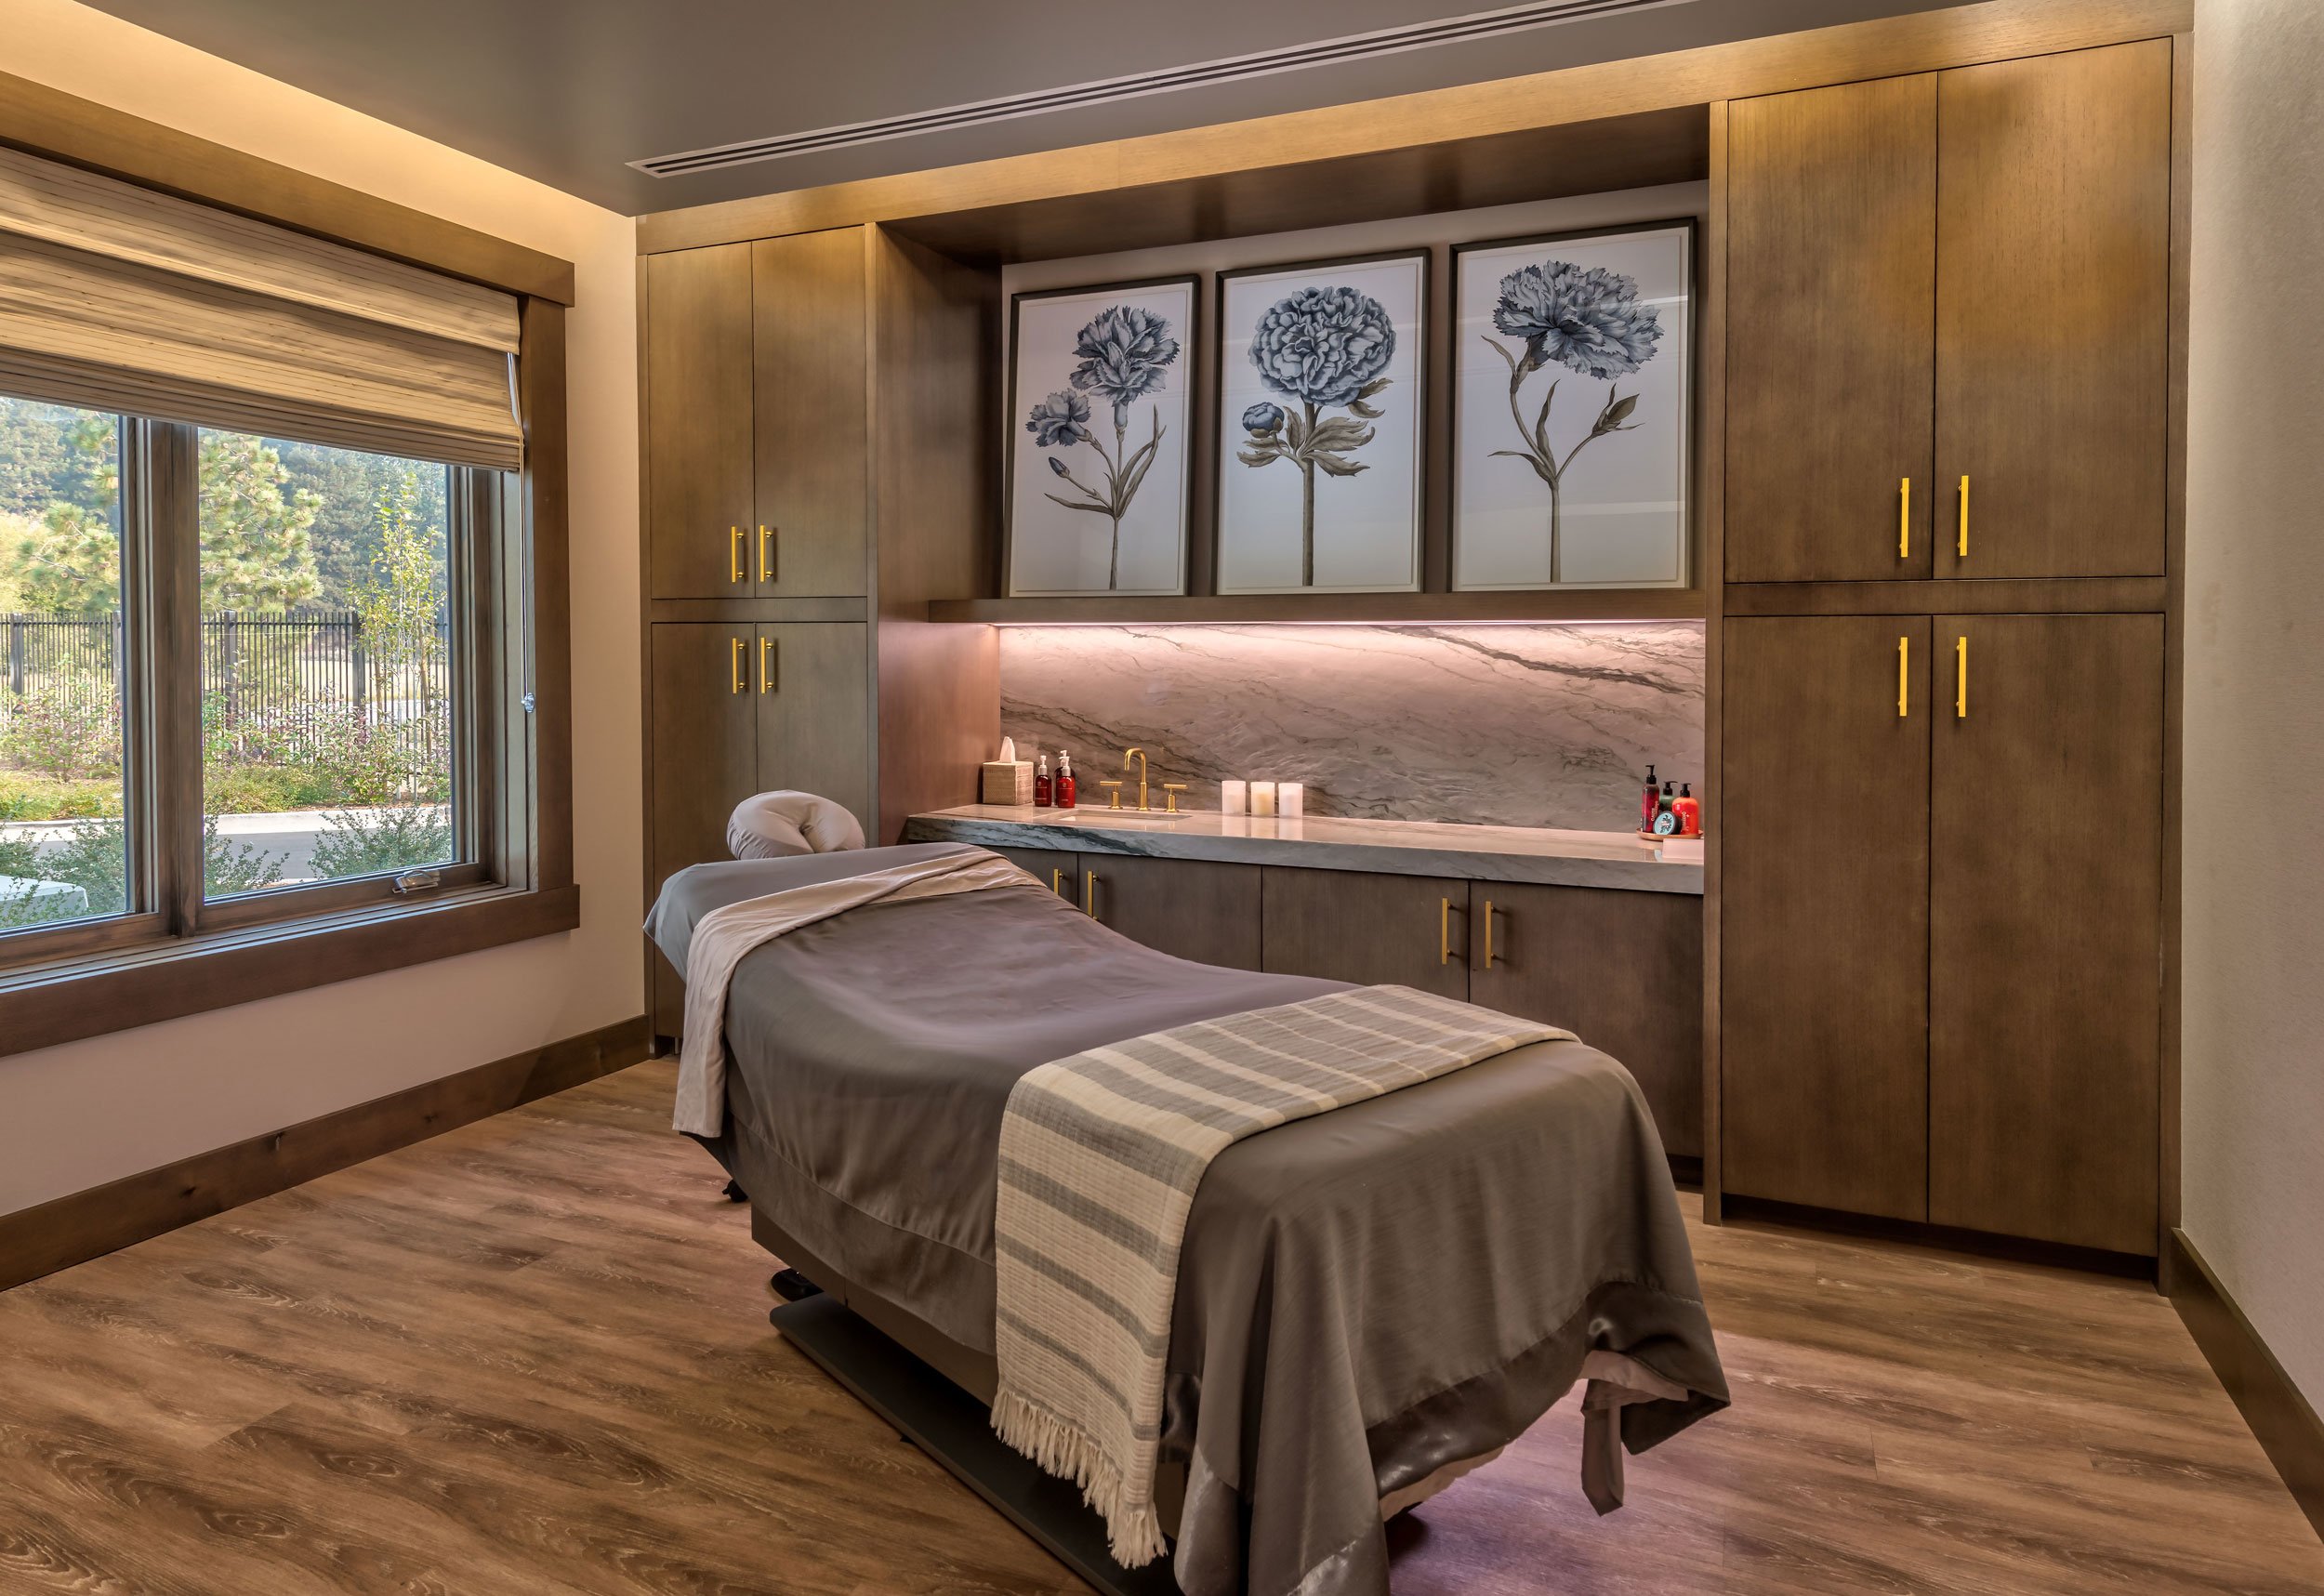 Tahoe Beach Club's spa features a tranquil massage room with a wooden floor and ample natural light from a large window. (Copy) (Copy)